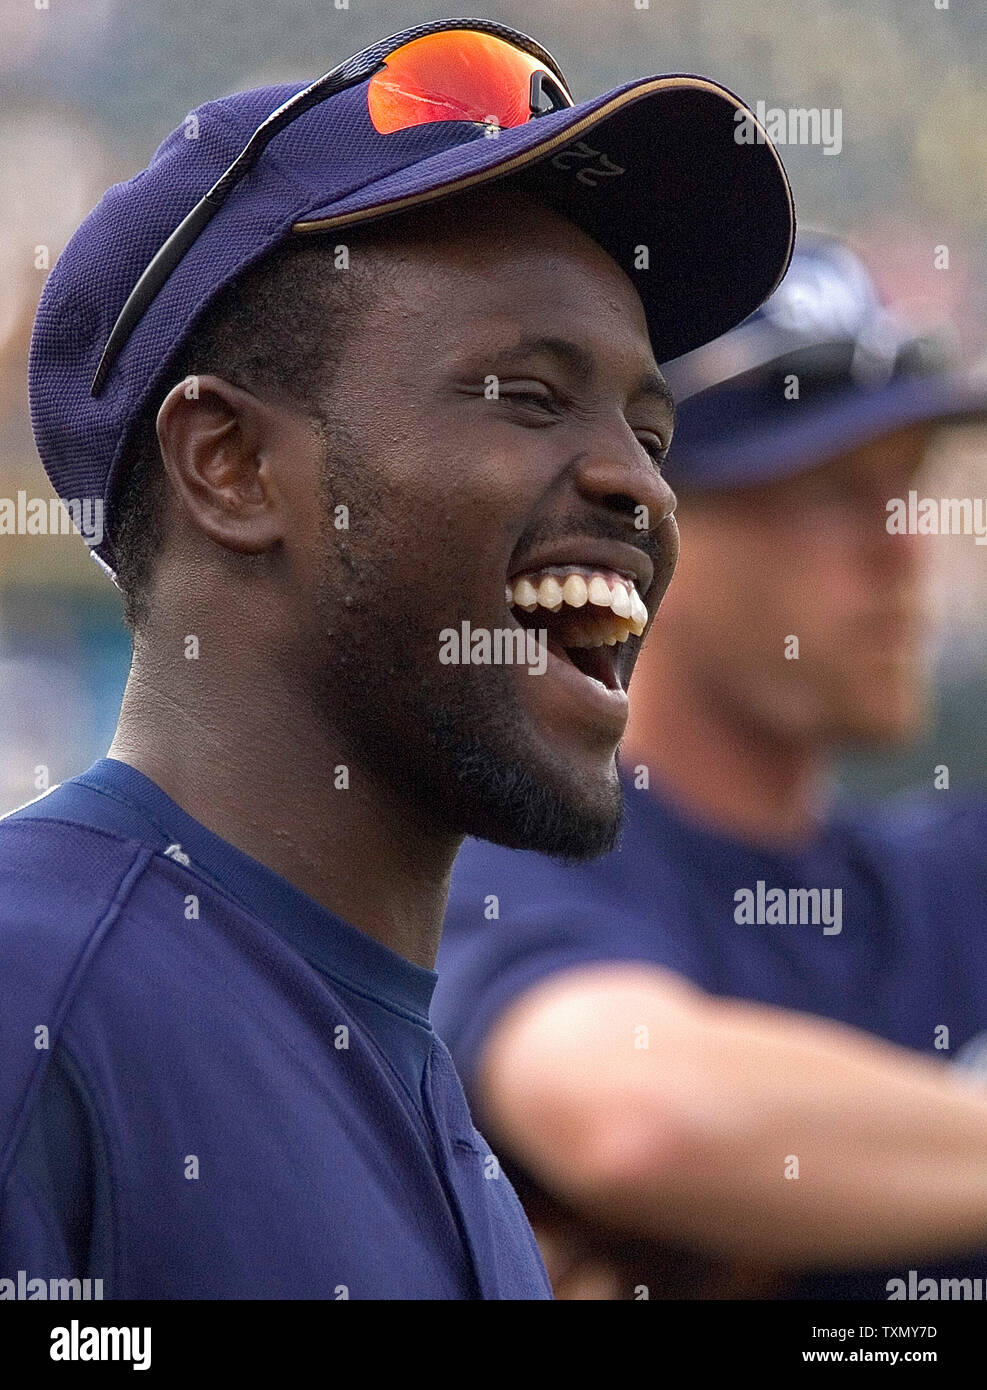 Milwaukee Brewers Tony Gwynn, son of San Diego Padres great Tony Gwynn, enjoys a laugh with teammates prior to game against the Colorado Rockies at Coors Field in Denver, Colorado July 31, 2006.    (UPI Photo/Gary C. Caskey) Stock Photo